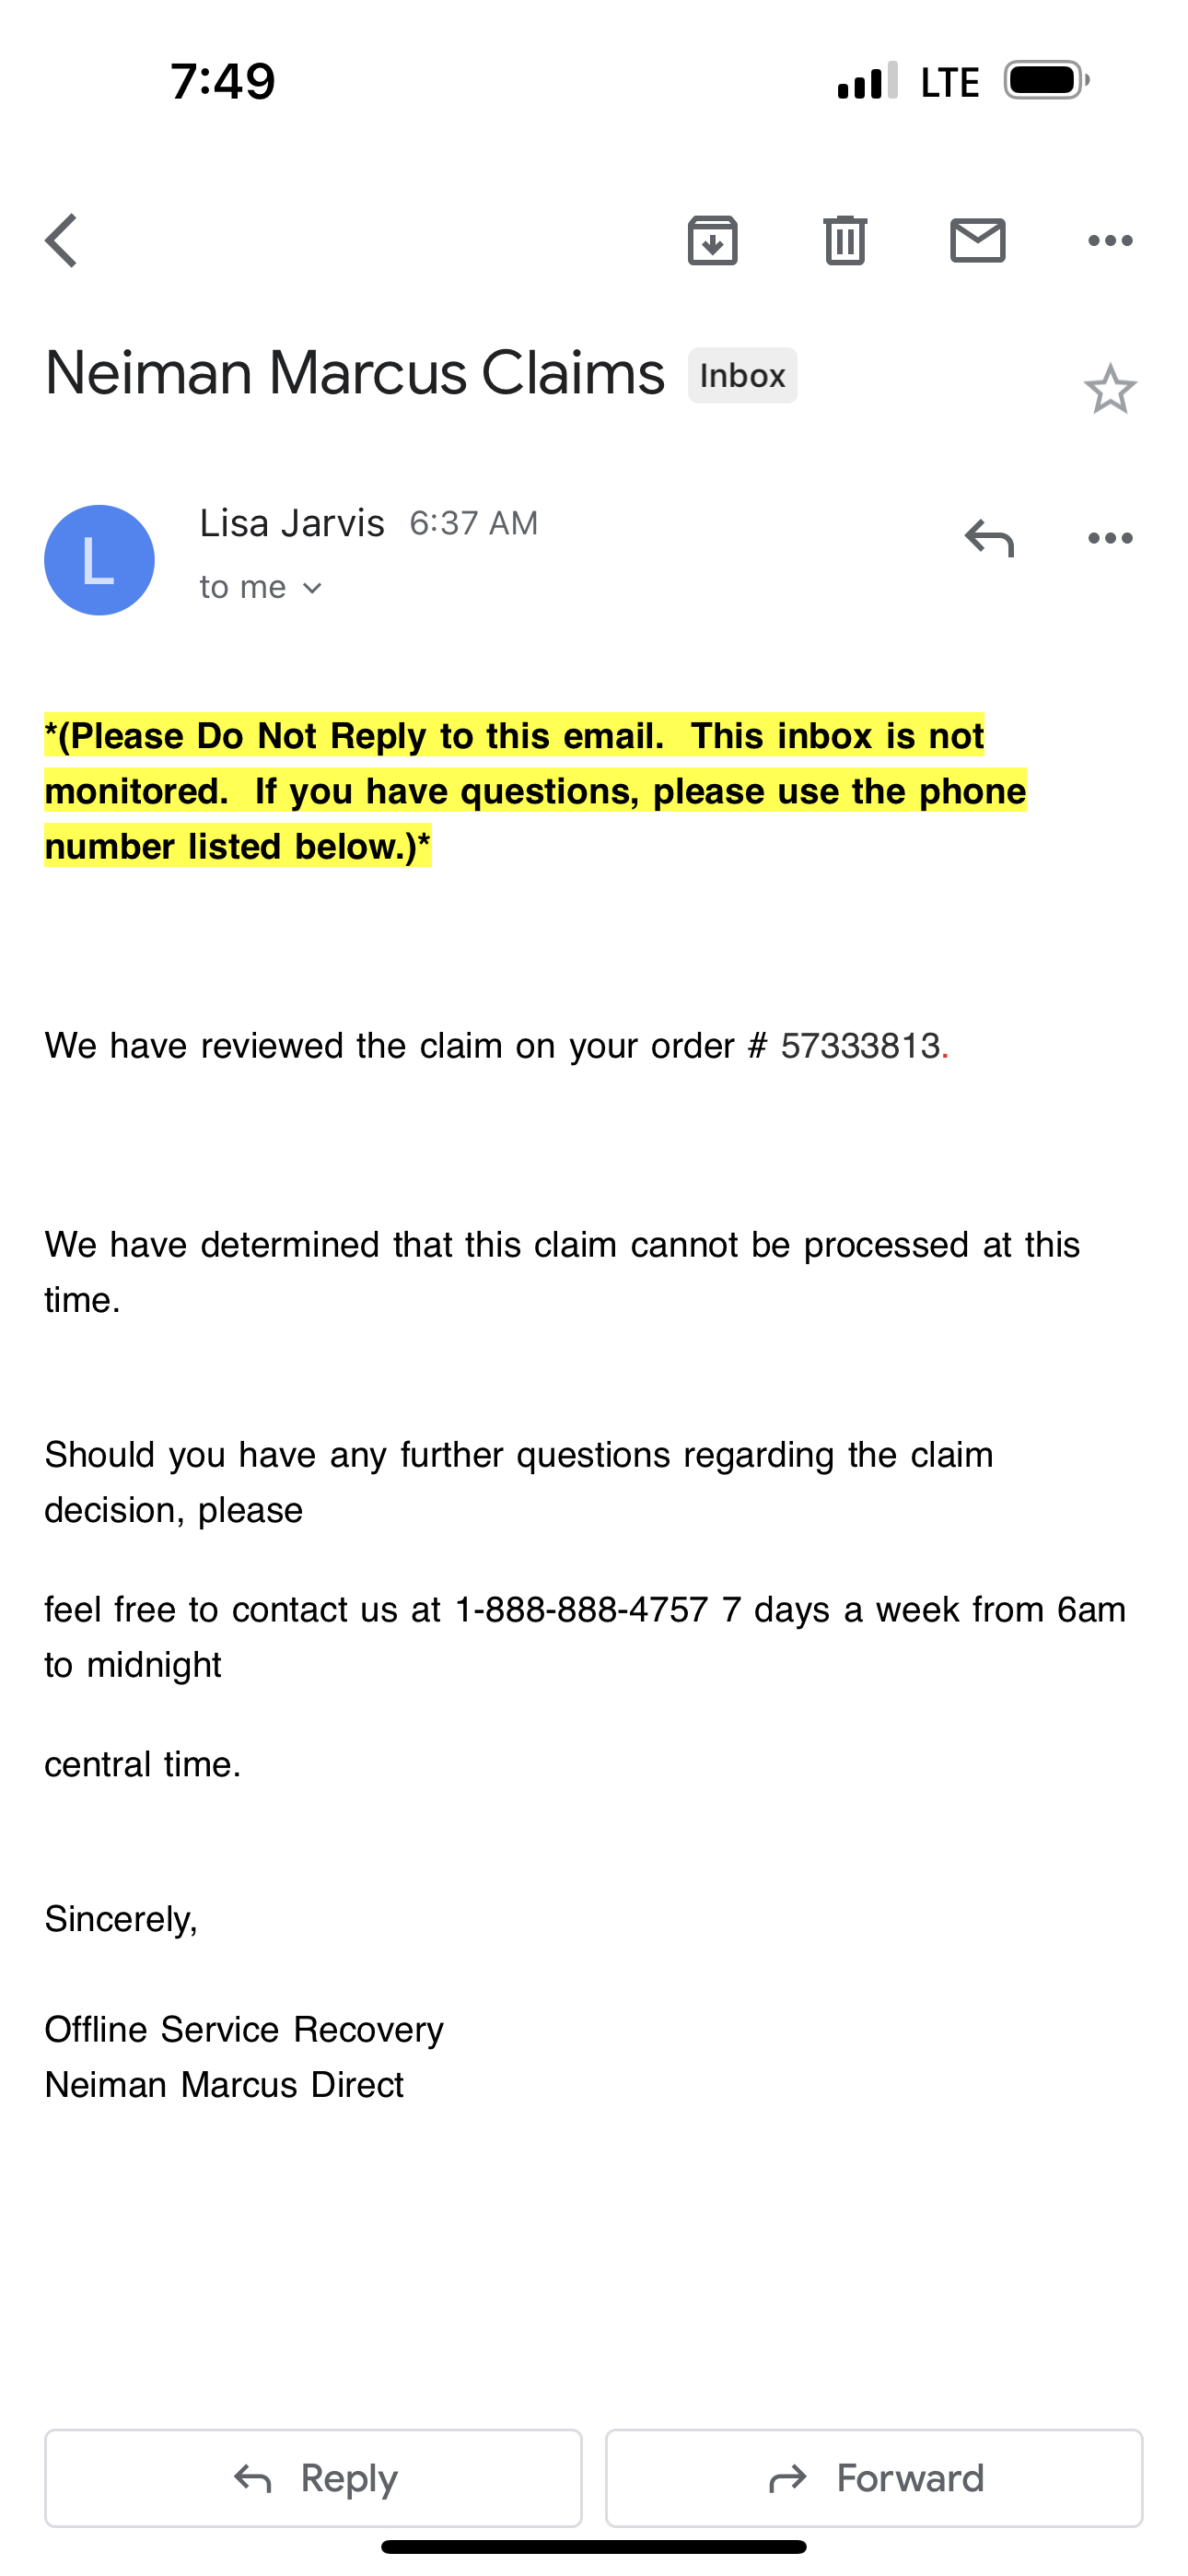 Neiman marcus last call store Reviews  neiman-marcus-lastcall.store scam  explained 